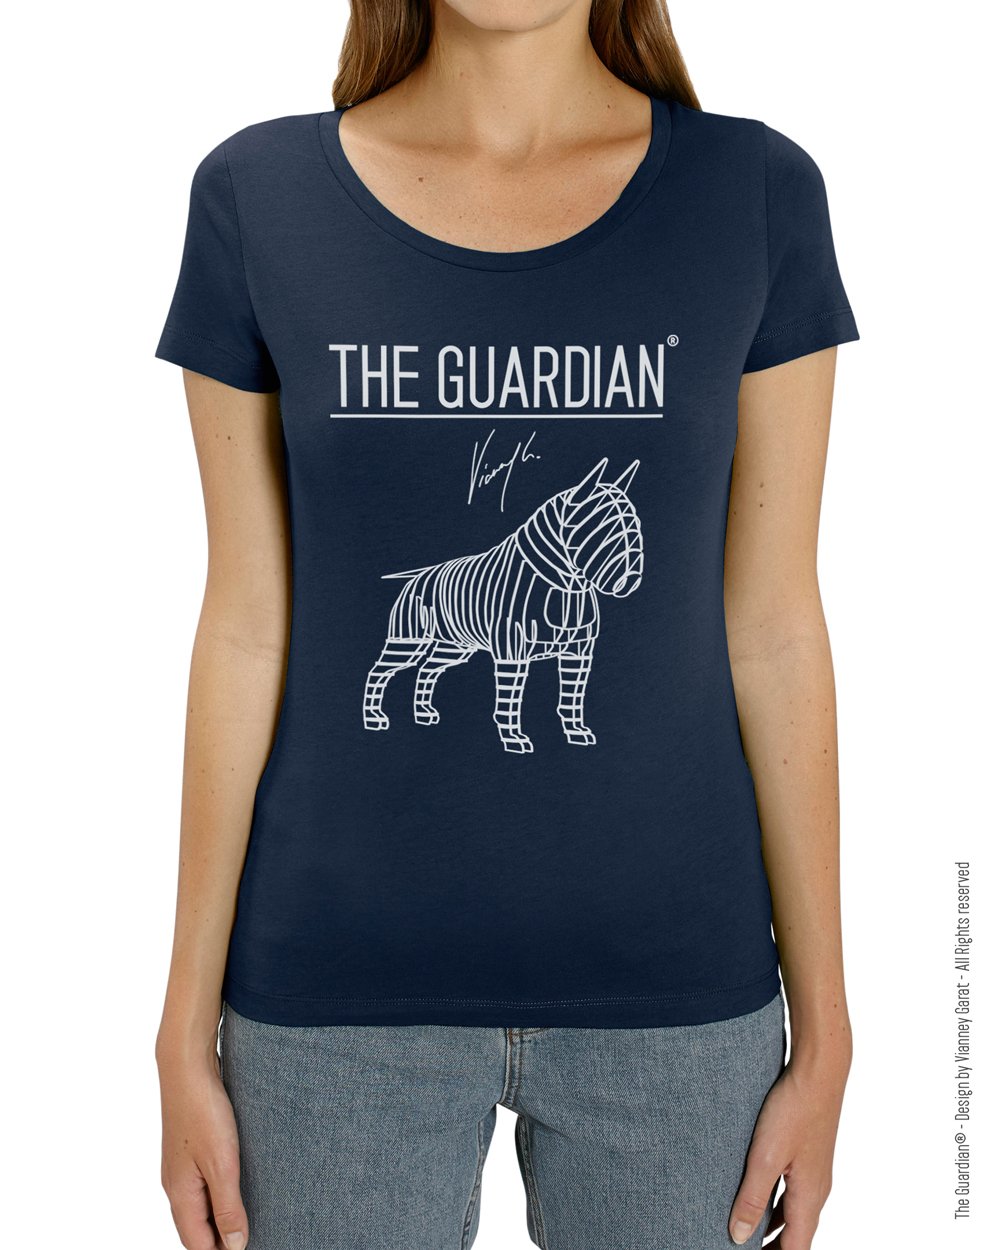 Image of T-Shirt Femme The Guardian® Blue Navy Edition